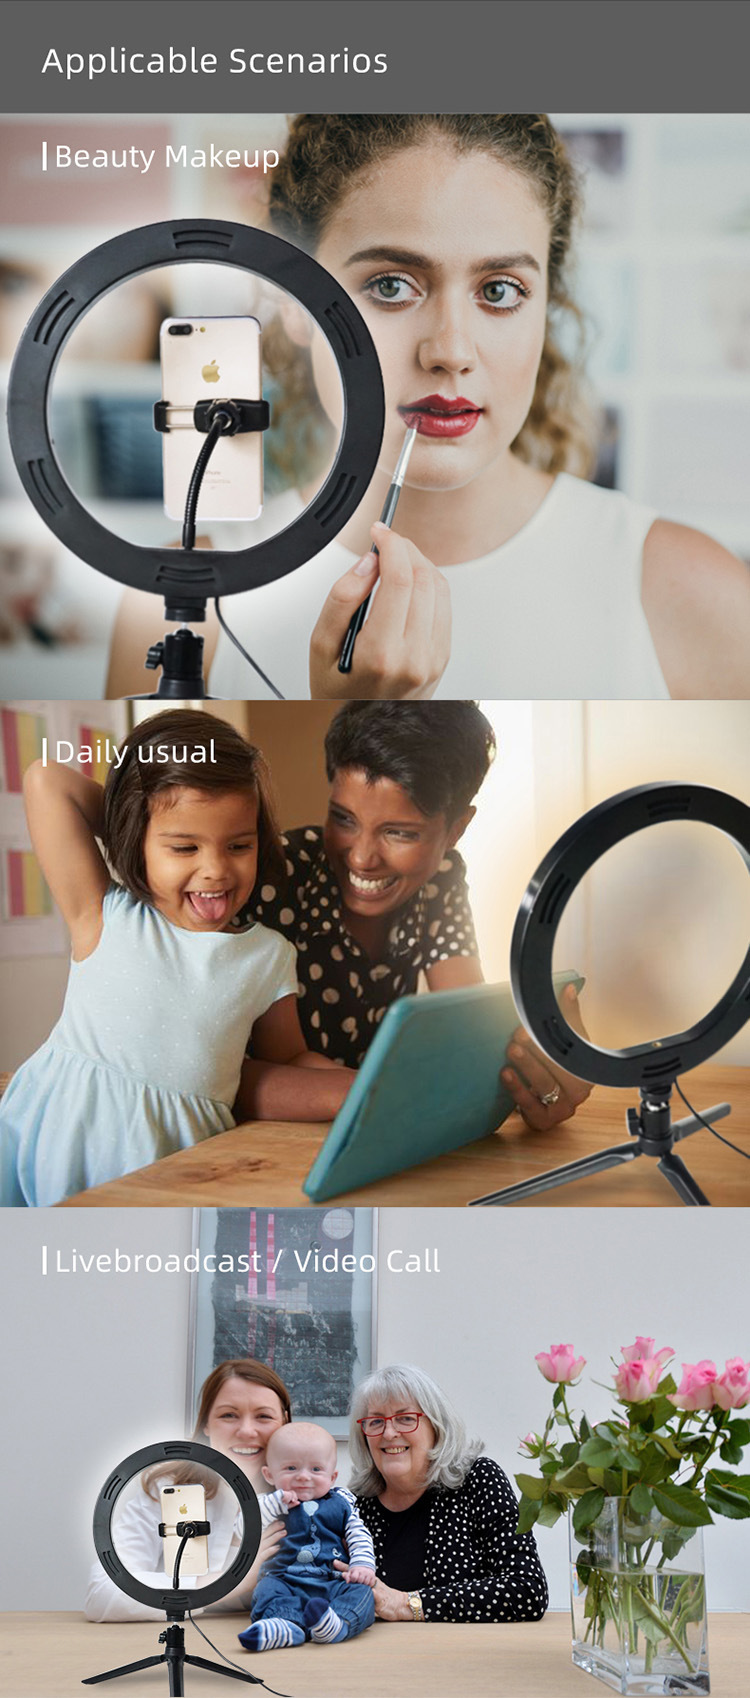 Desktop-LED-Live-Ring-Light-10-inch-Fill-Light-with-Mini-Tripod-Stand-USB-Power-Phone-Holder-for-You-1700106-2